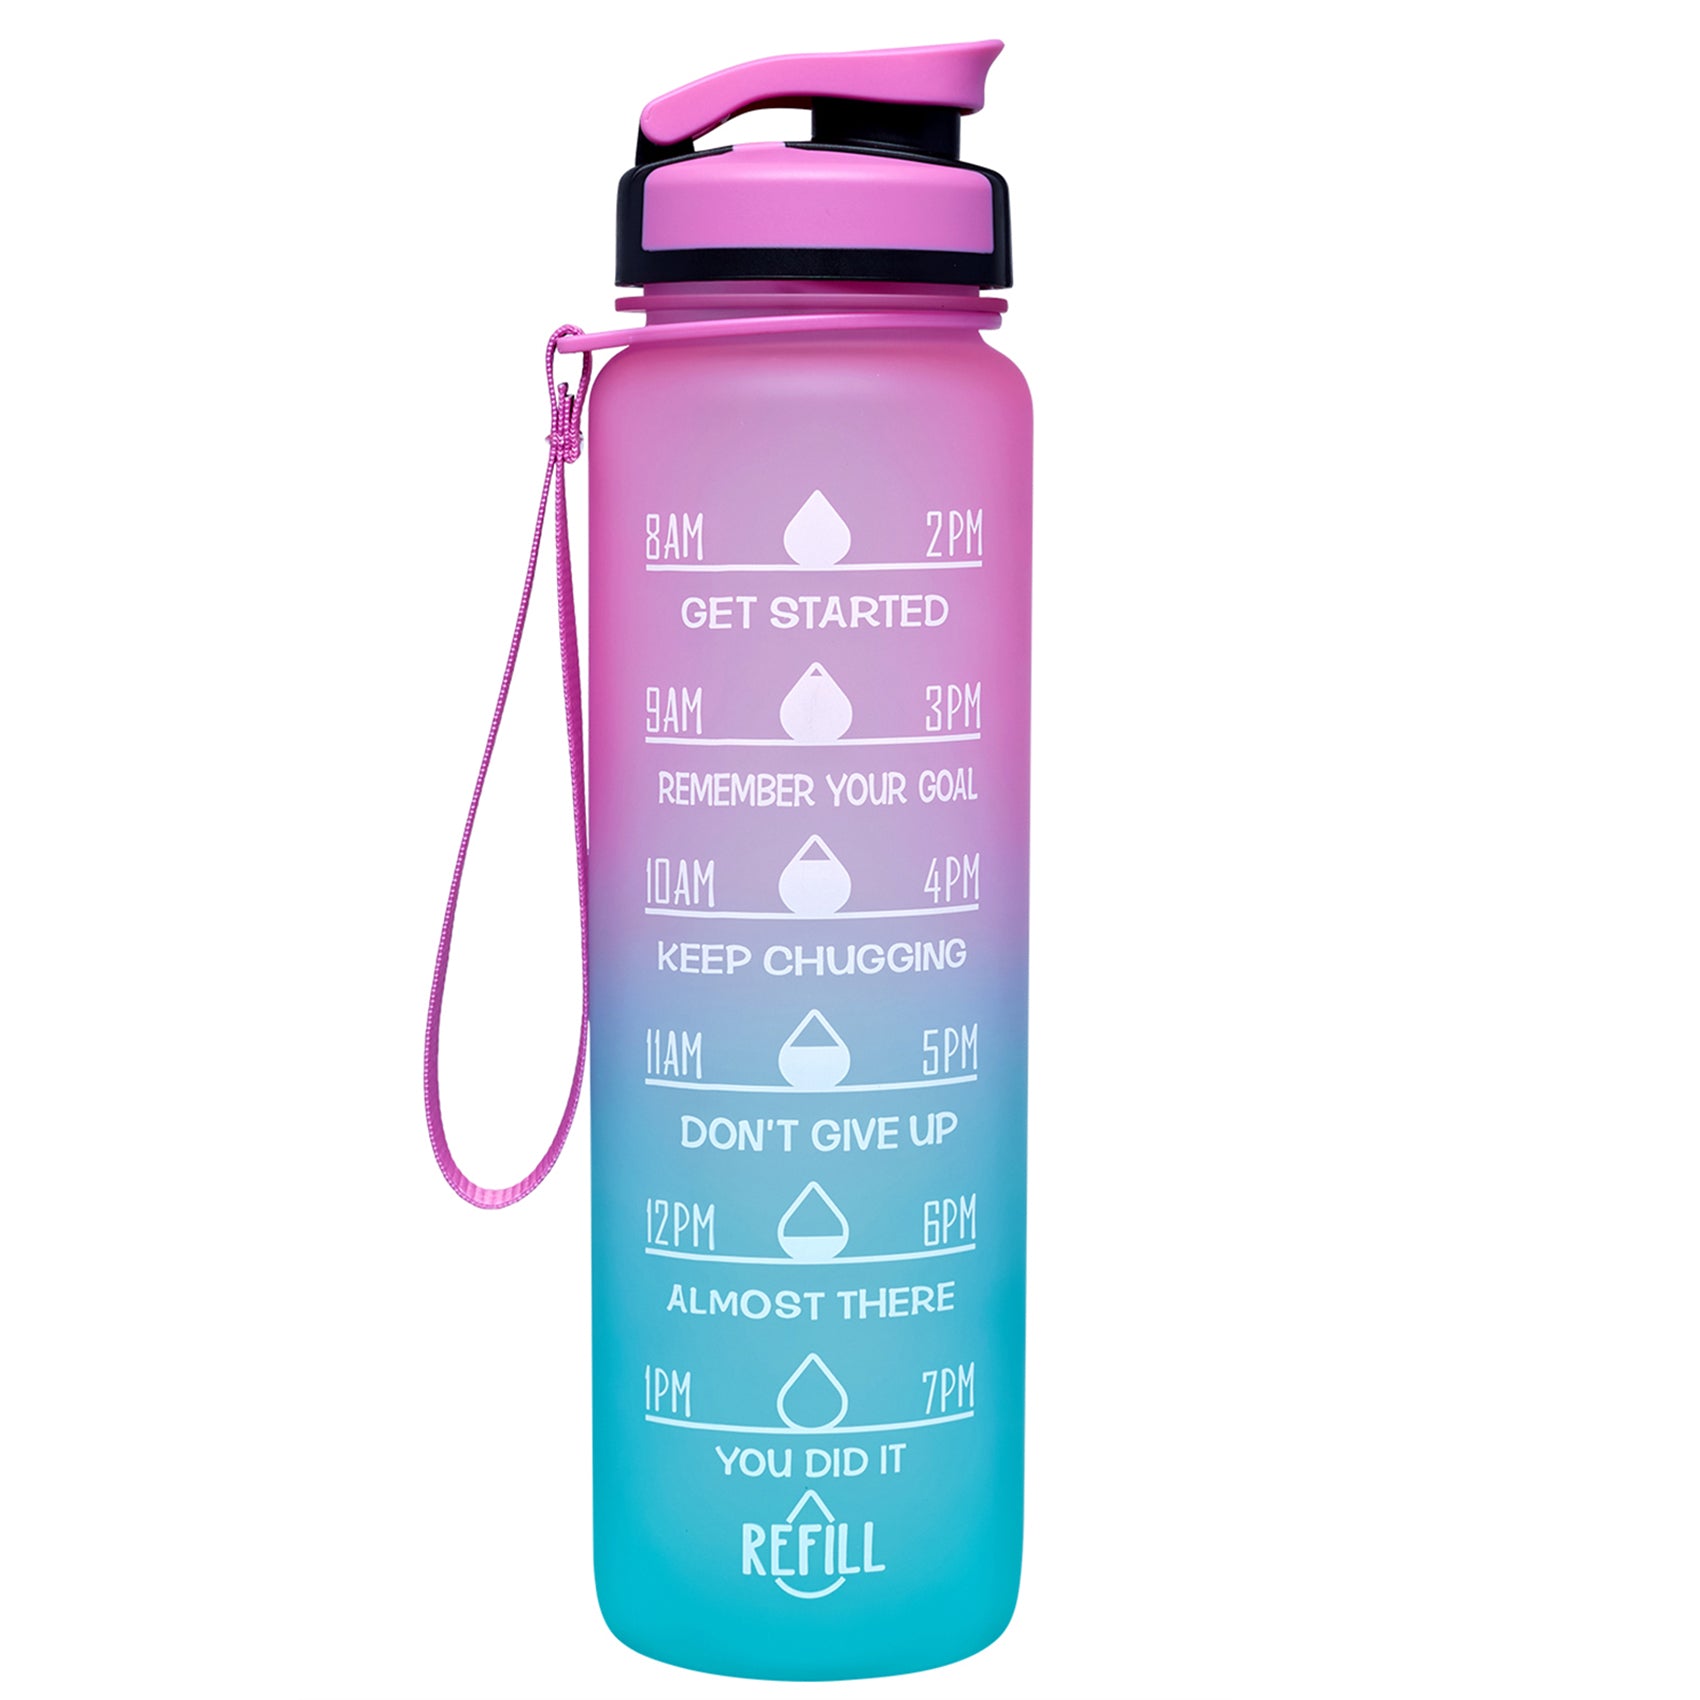 Sunvibe Motivational Water Bottle with Reminder Time Marker